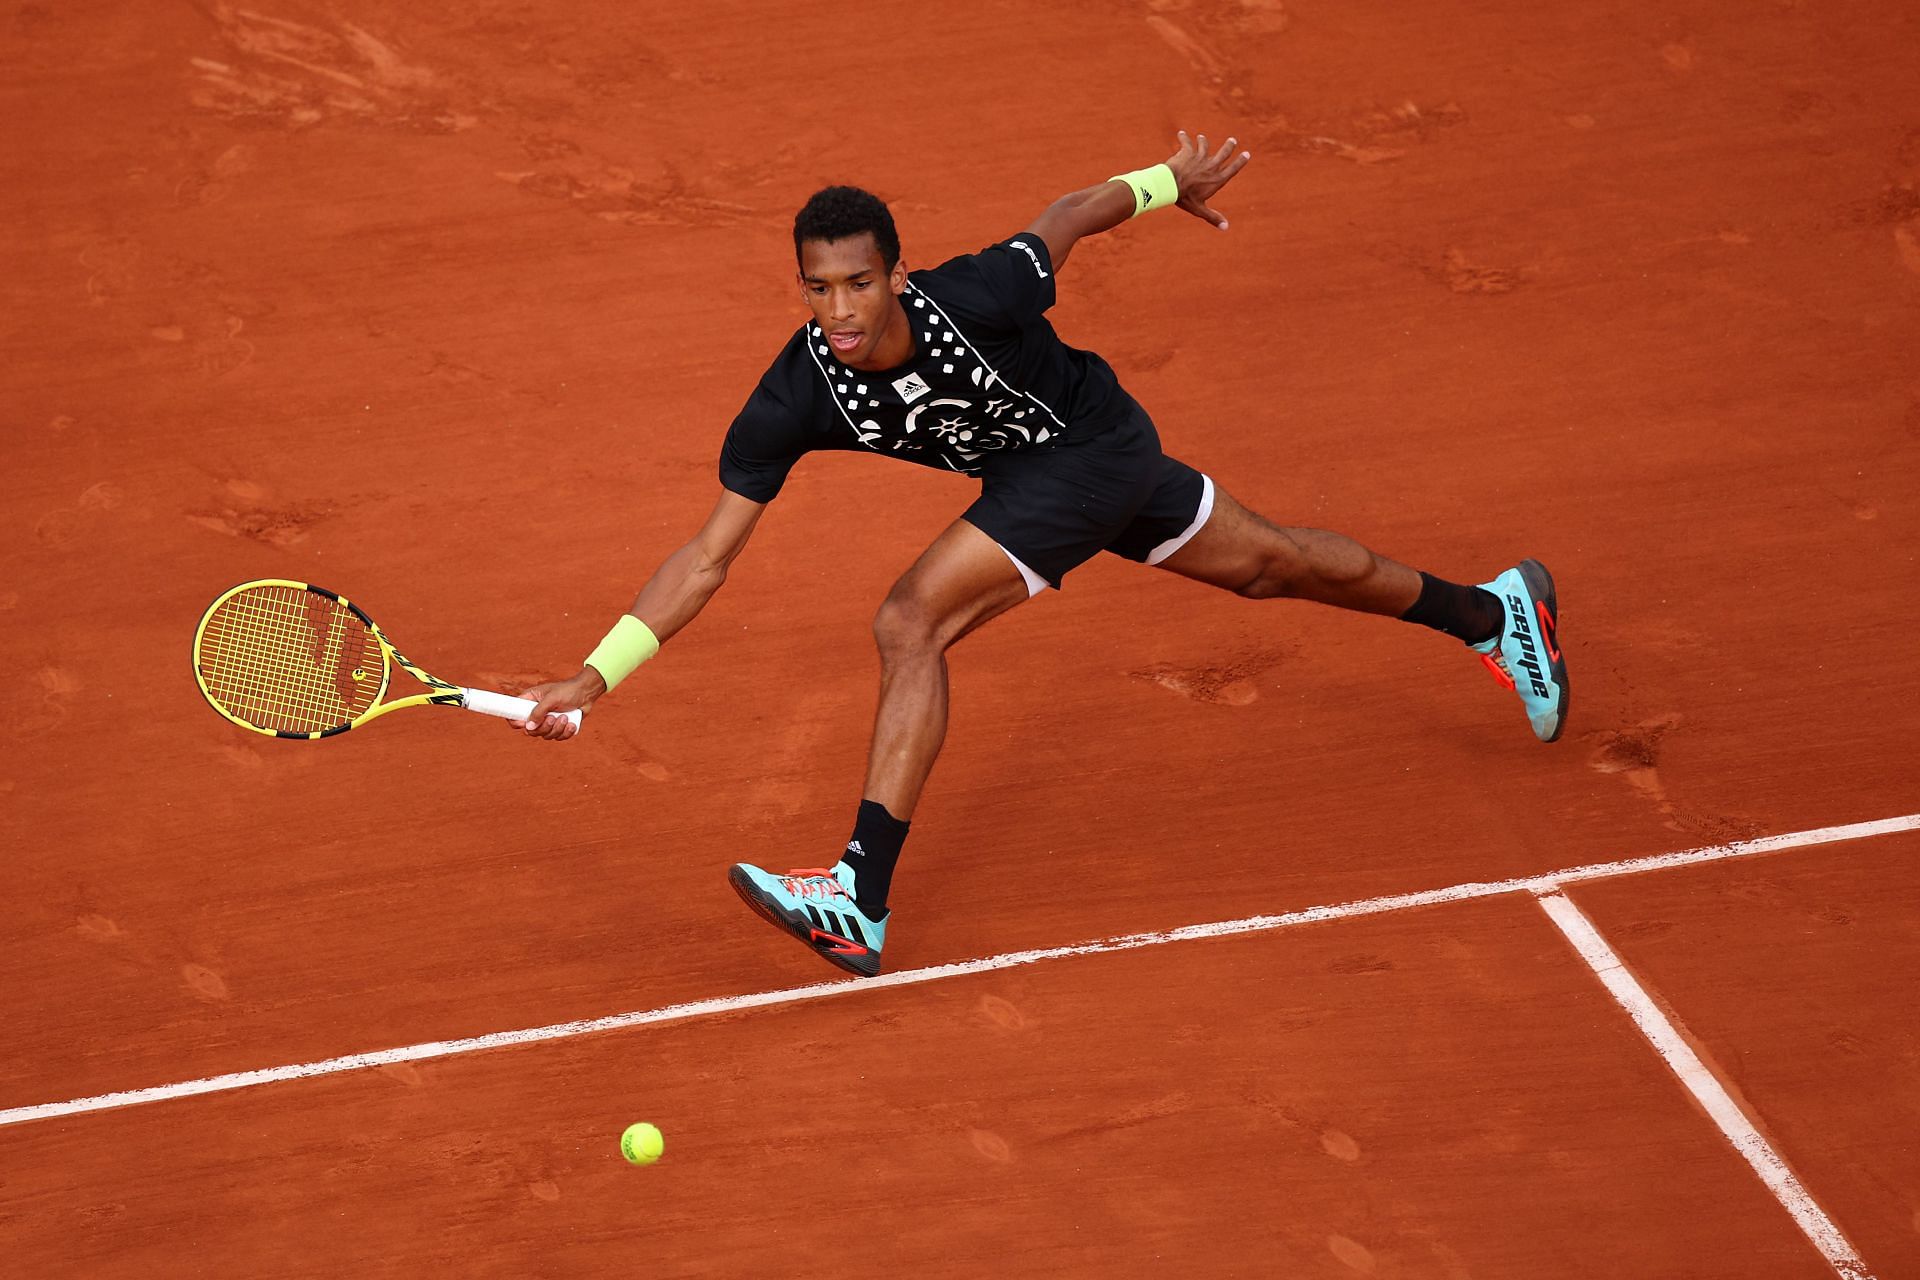 Felix Auger Aliassime at the 2022 French Open